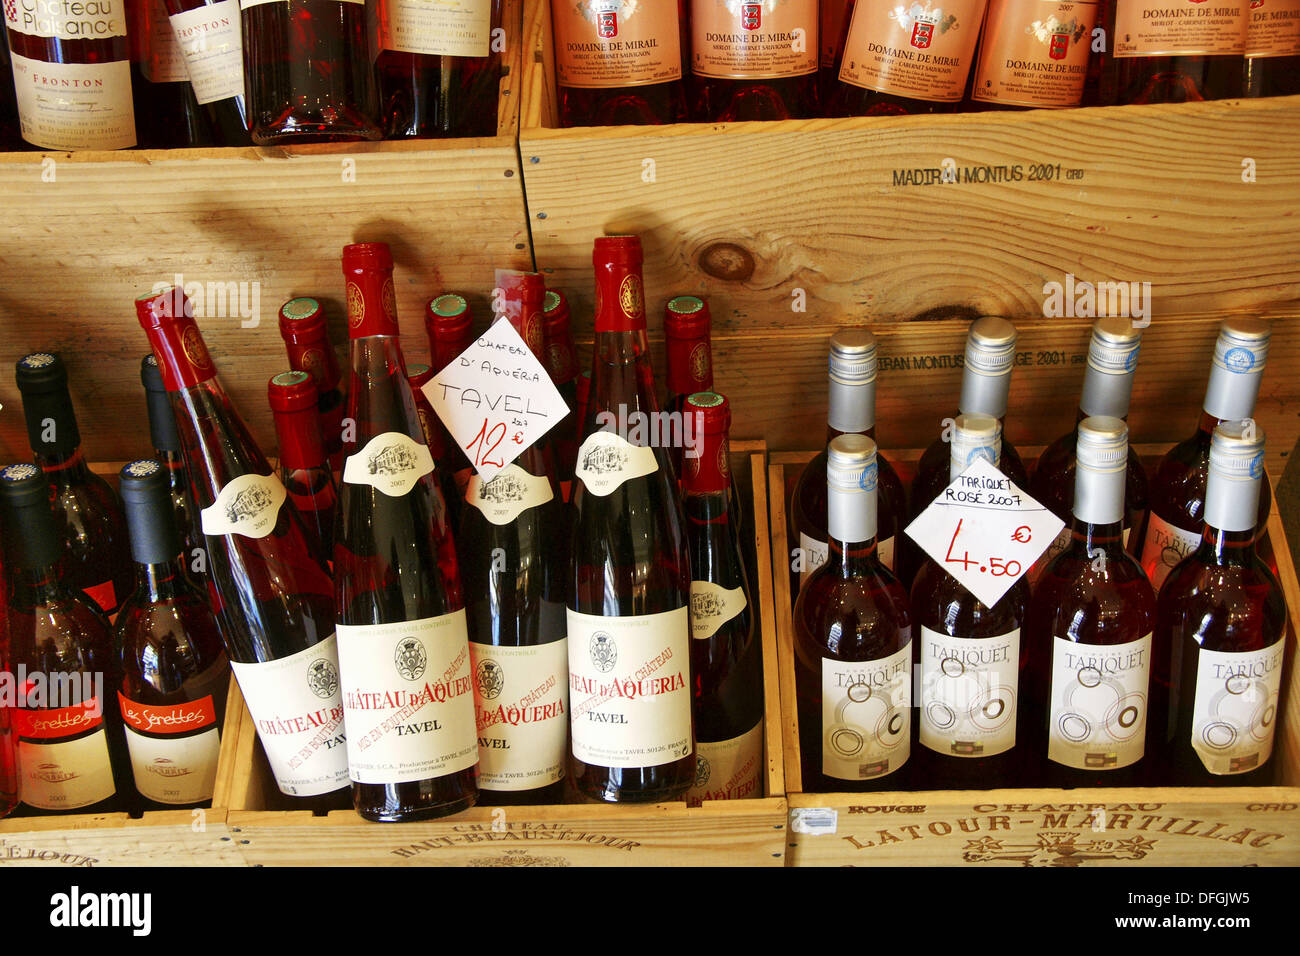 Different French wines (Tavel, Tariquet, etc.), France Stock Photo